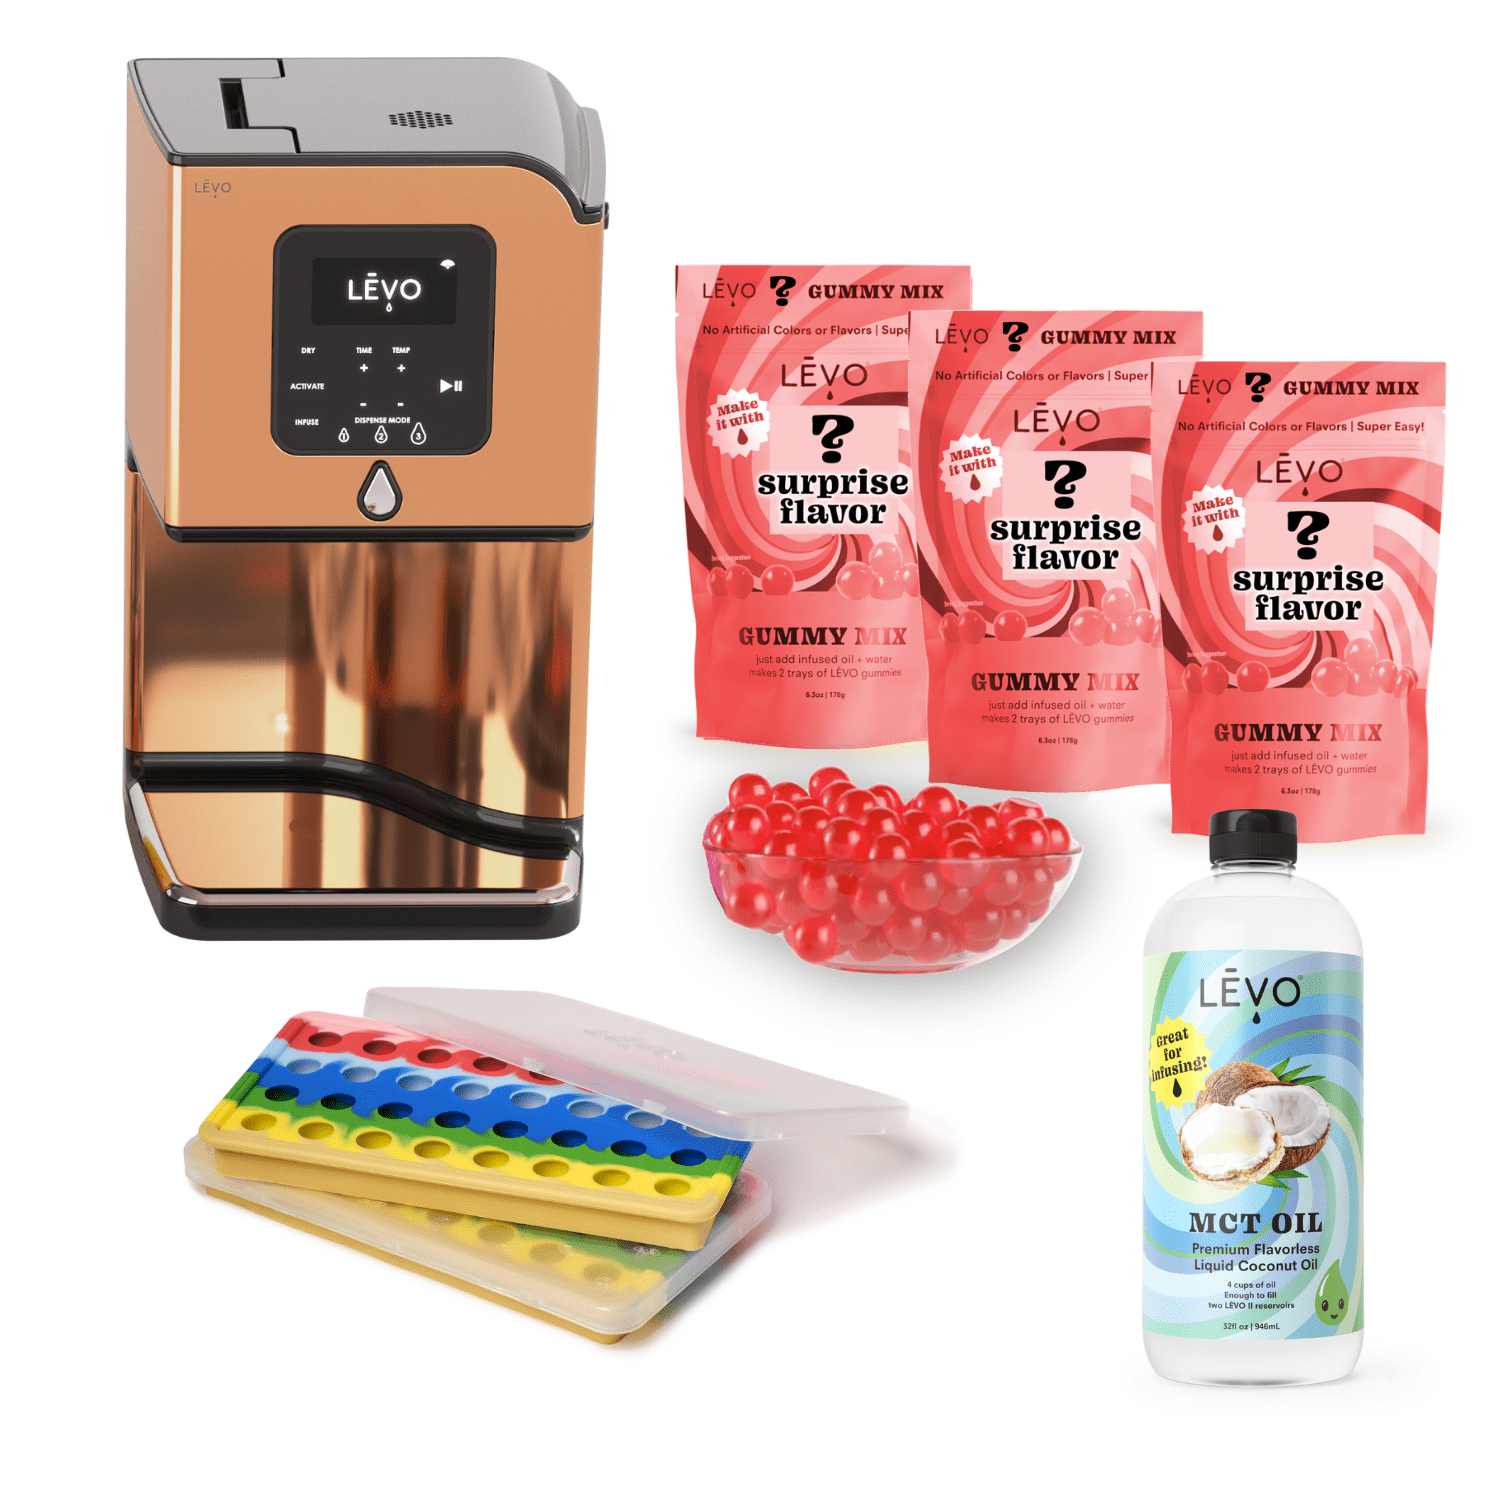 Gummy Edibles Making Kit with LĒVO Lux, MCT Oil, Gummy Candy Silicone Molds, and 3 bags of LEVO Gummy Mix